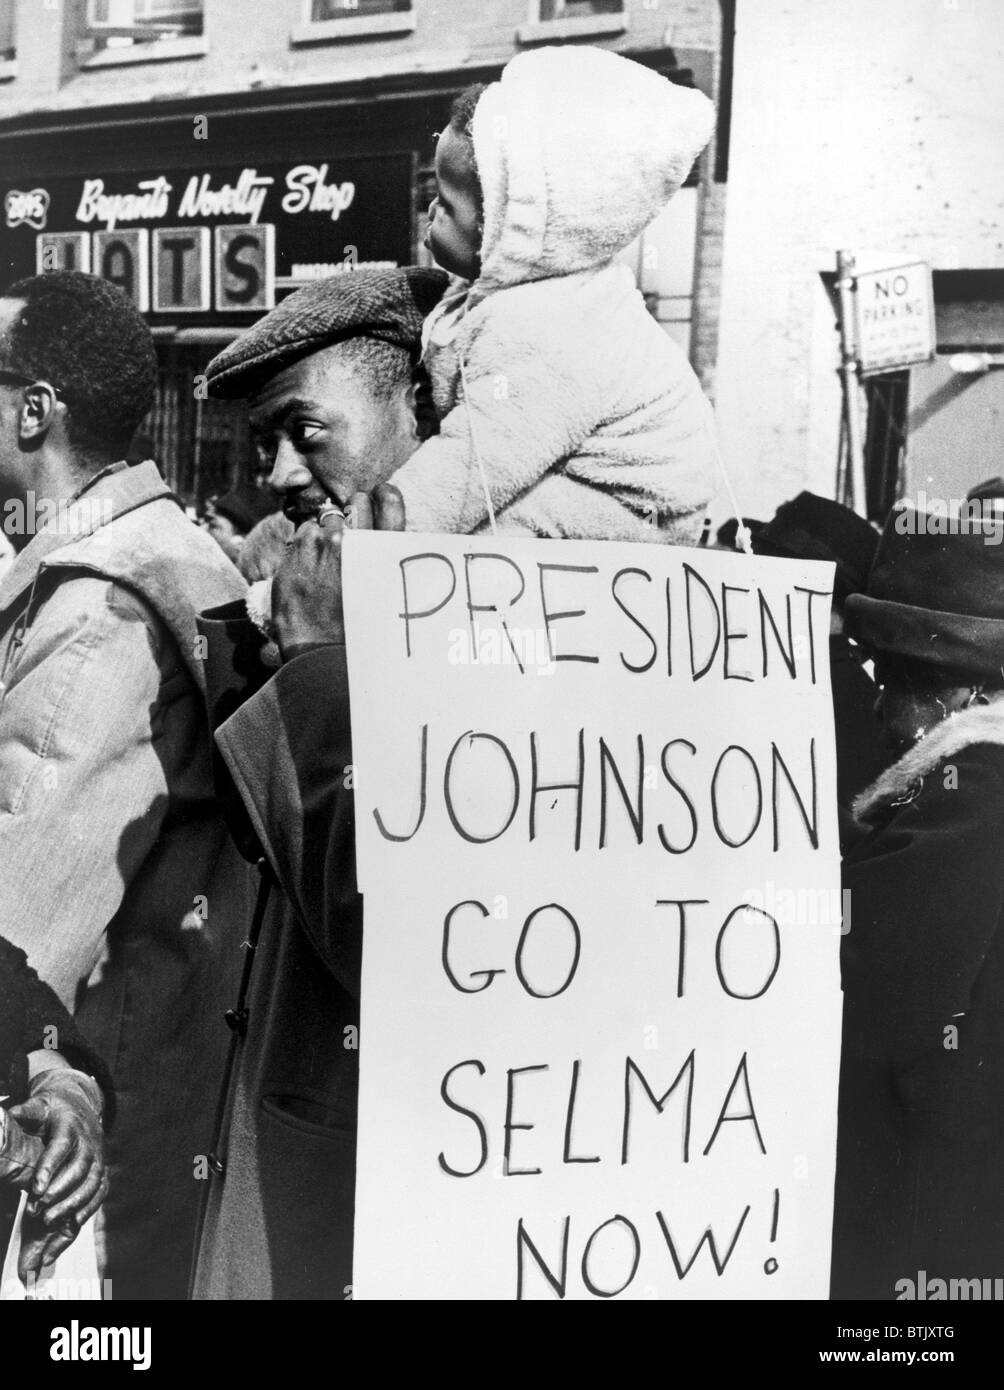 Civil Rights, 'President Johnson go to Selma now!'. African American man carrying a child on his shoulders with a placard telling President Johnson to go to Selma, Alabama. Photo by Stanley Wolfson, 1965 Stock Photo